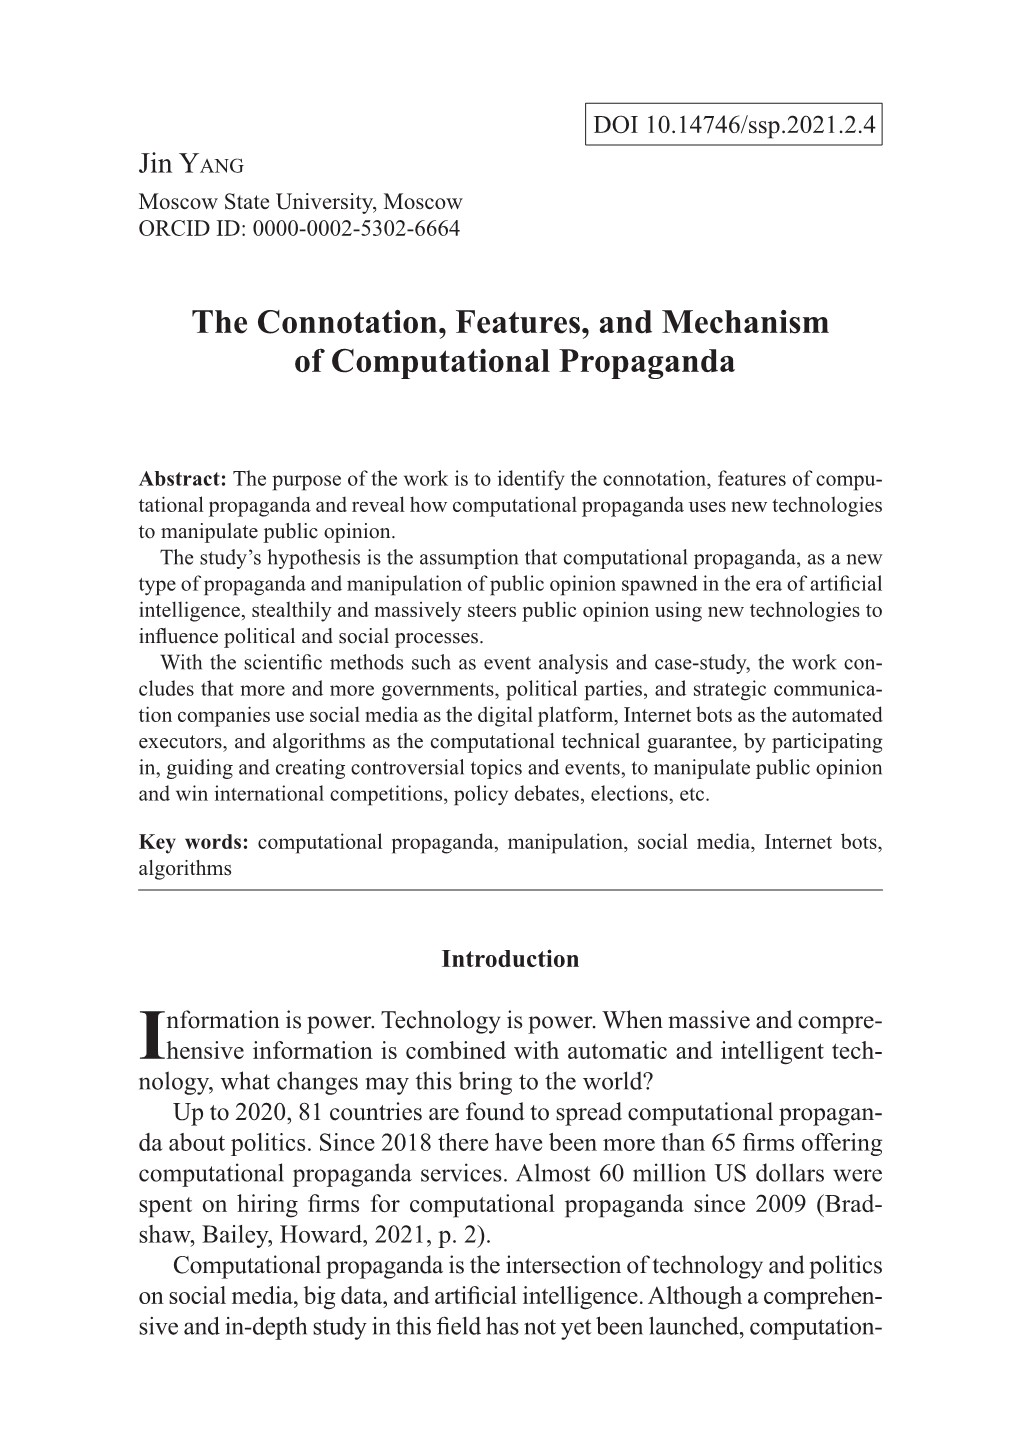 The Connotation, Features, and Mechanism of Computational Propaganda